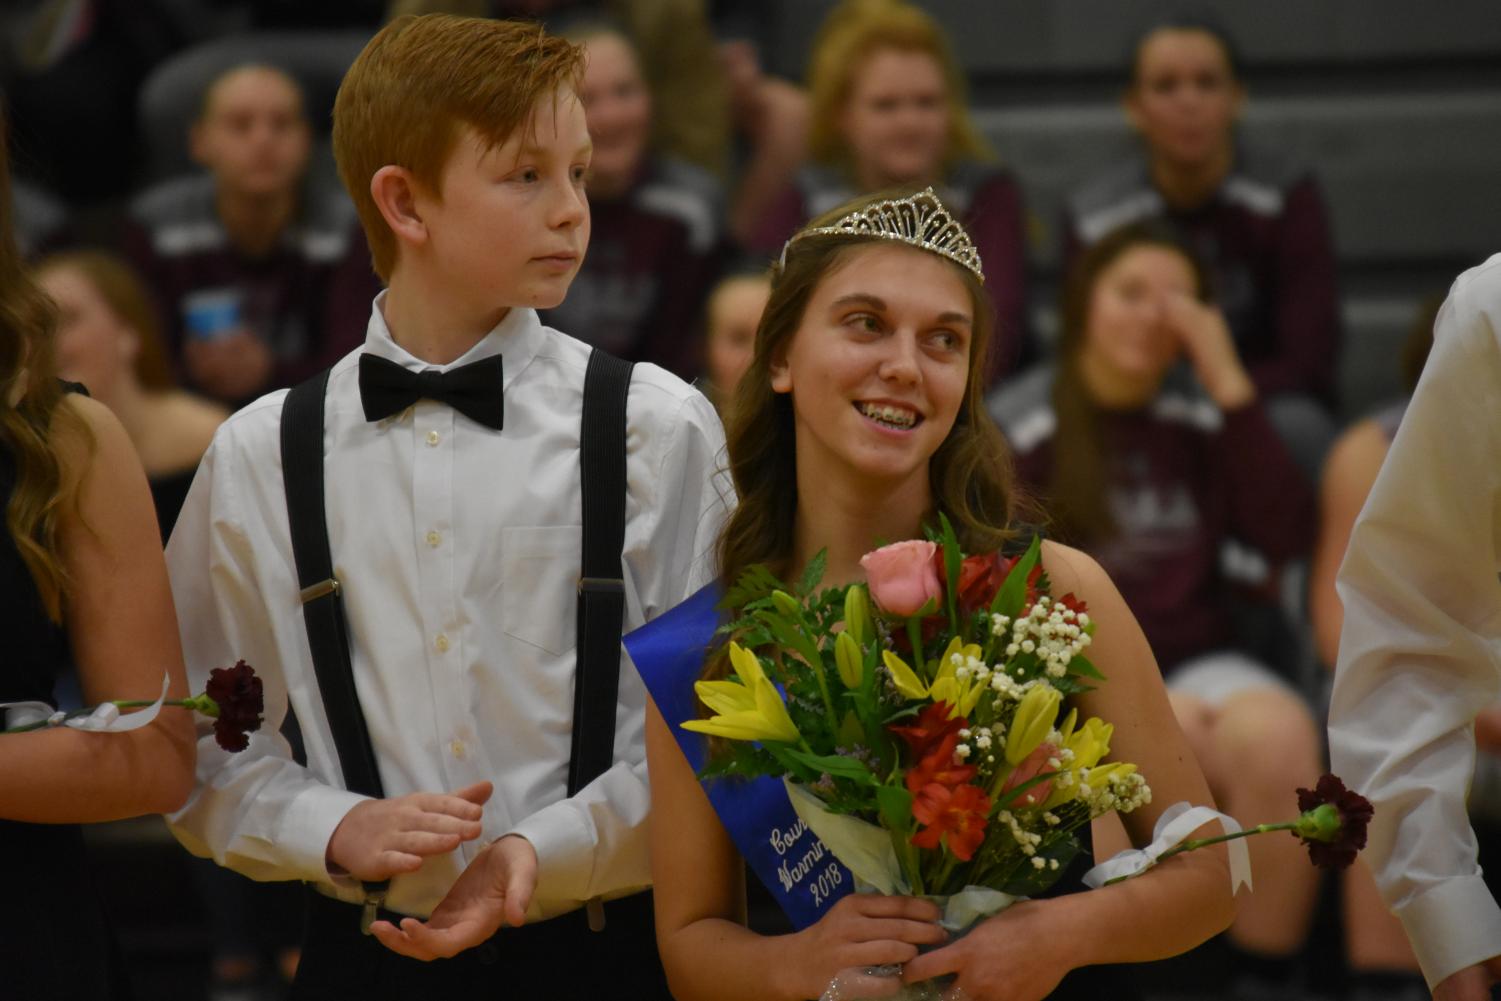 Freshman+and+sophomore+Courtwarming+Princes+and+Princesses+announced